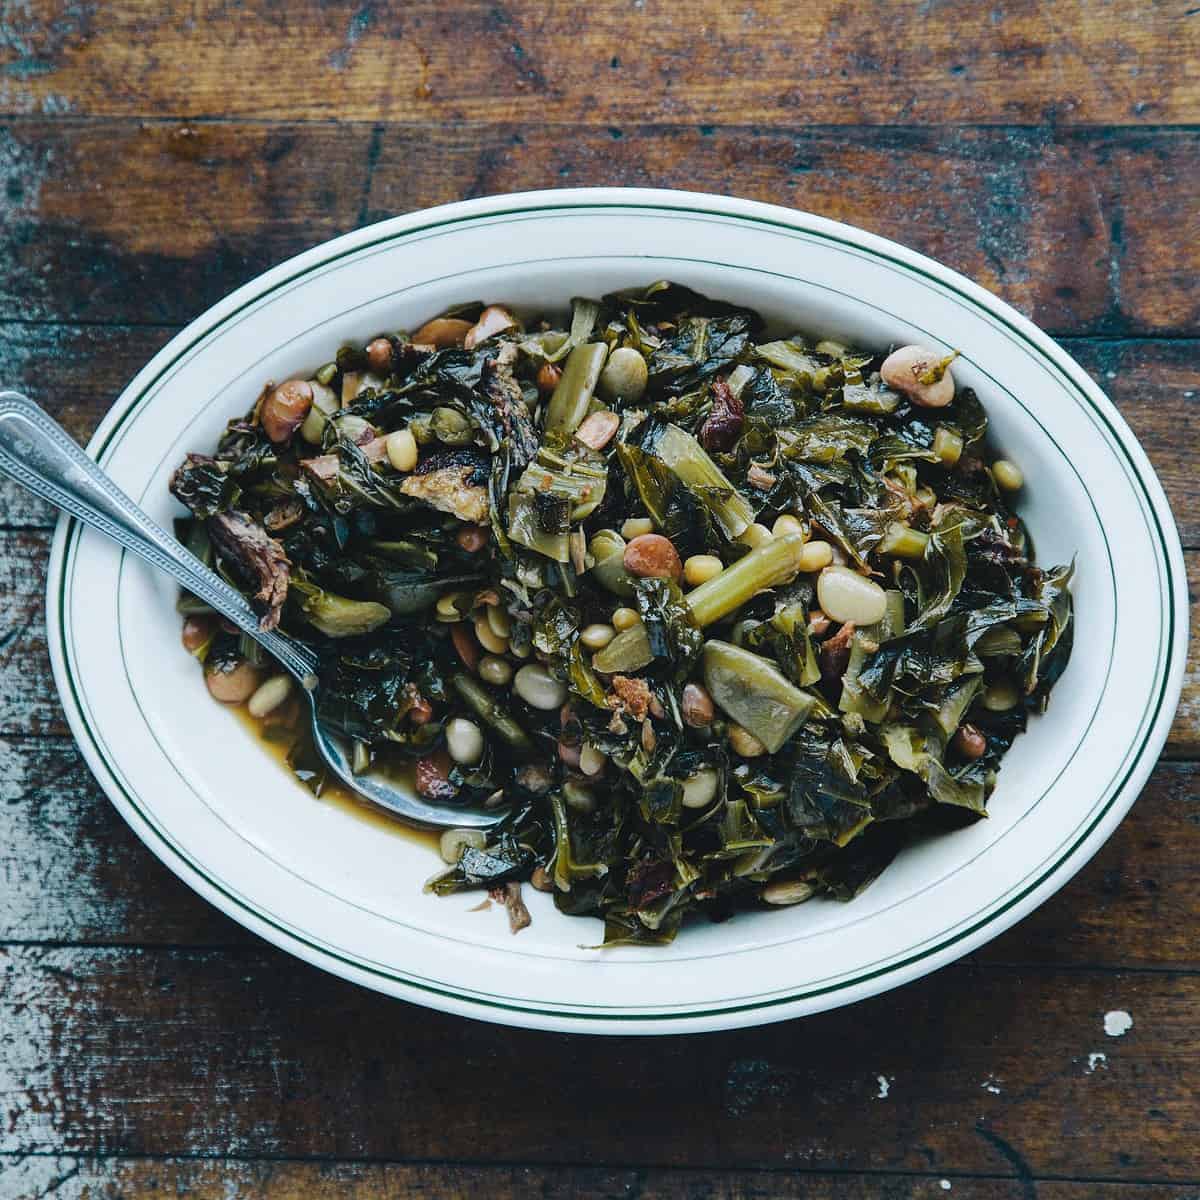  Who says vegetarian food has to be bland? These collard greens will prove the skeptics wrong.